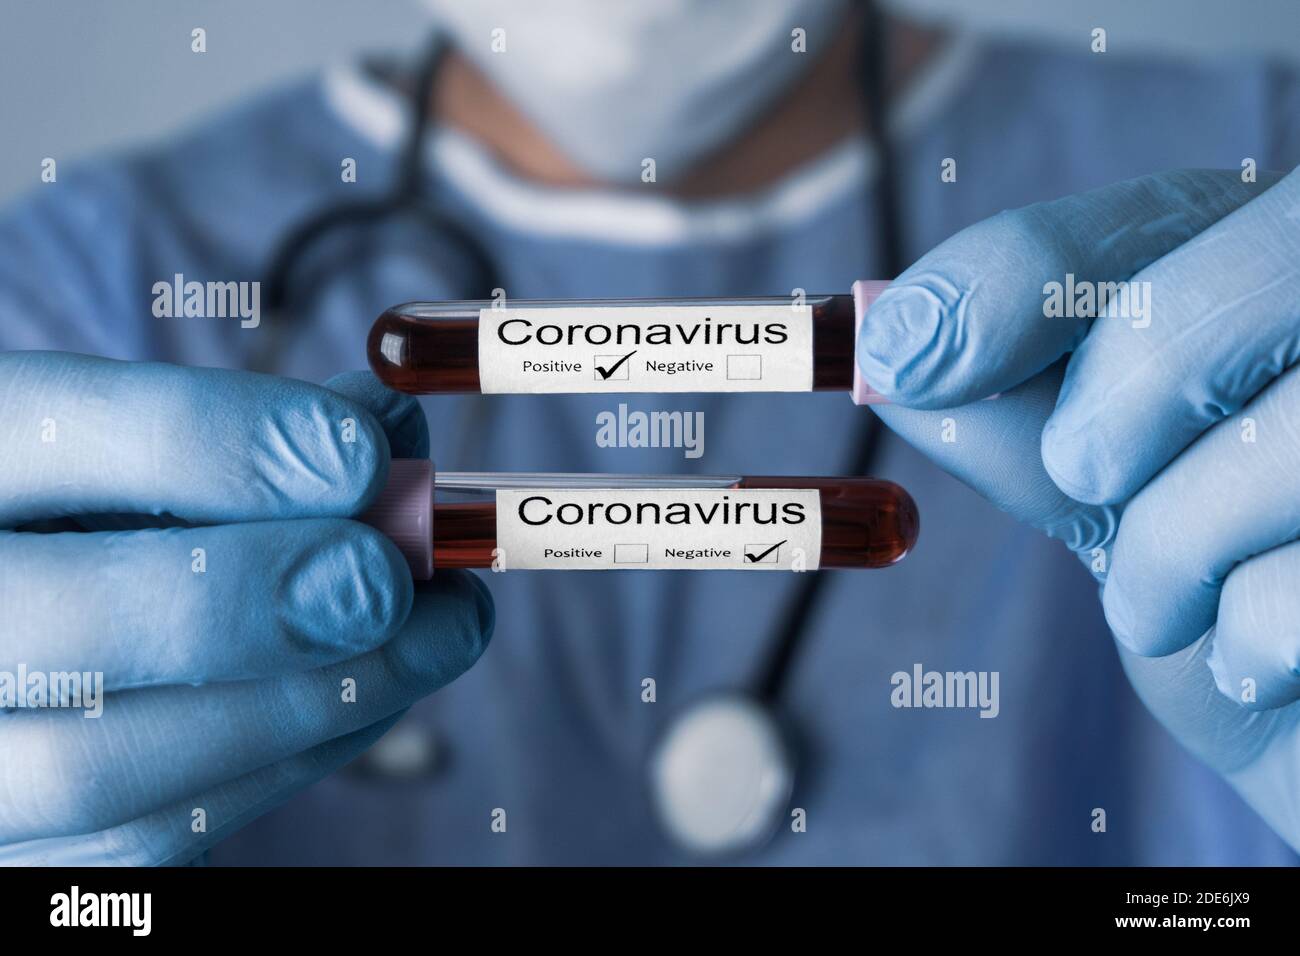 Doctor holding test tubes with Positive and Negative Coronavirus test blood samples. Covid 19 concept and background. Stock Photo